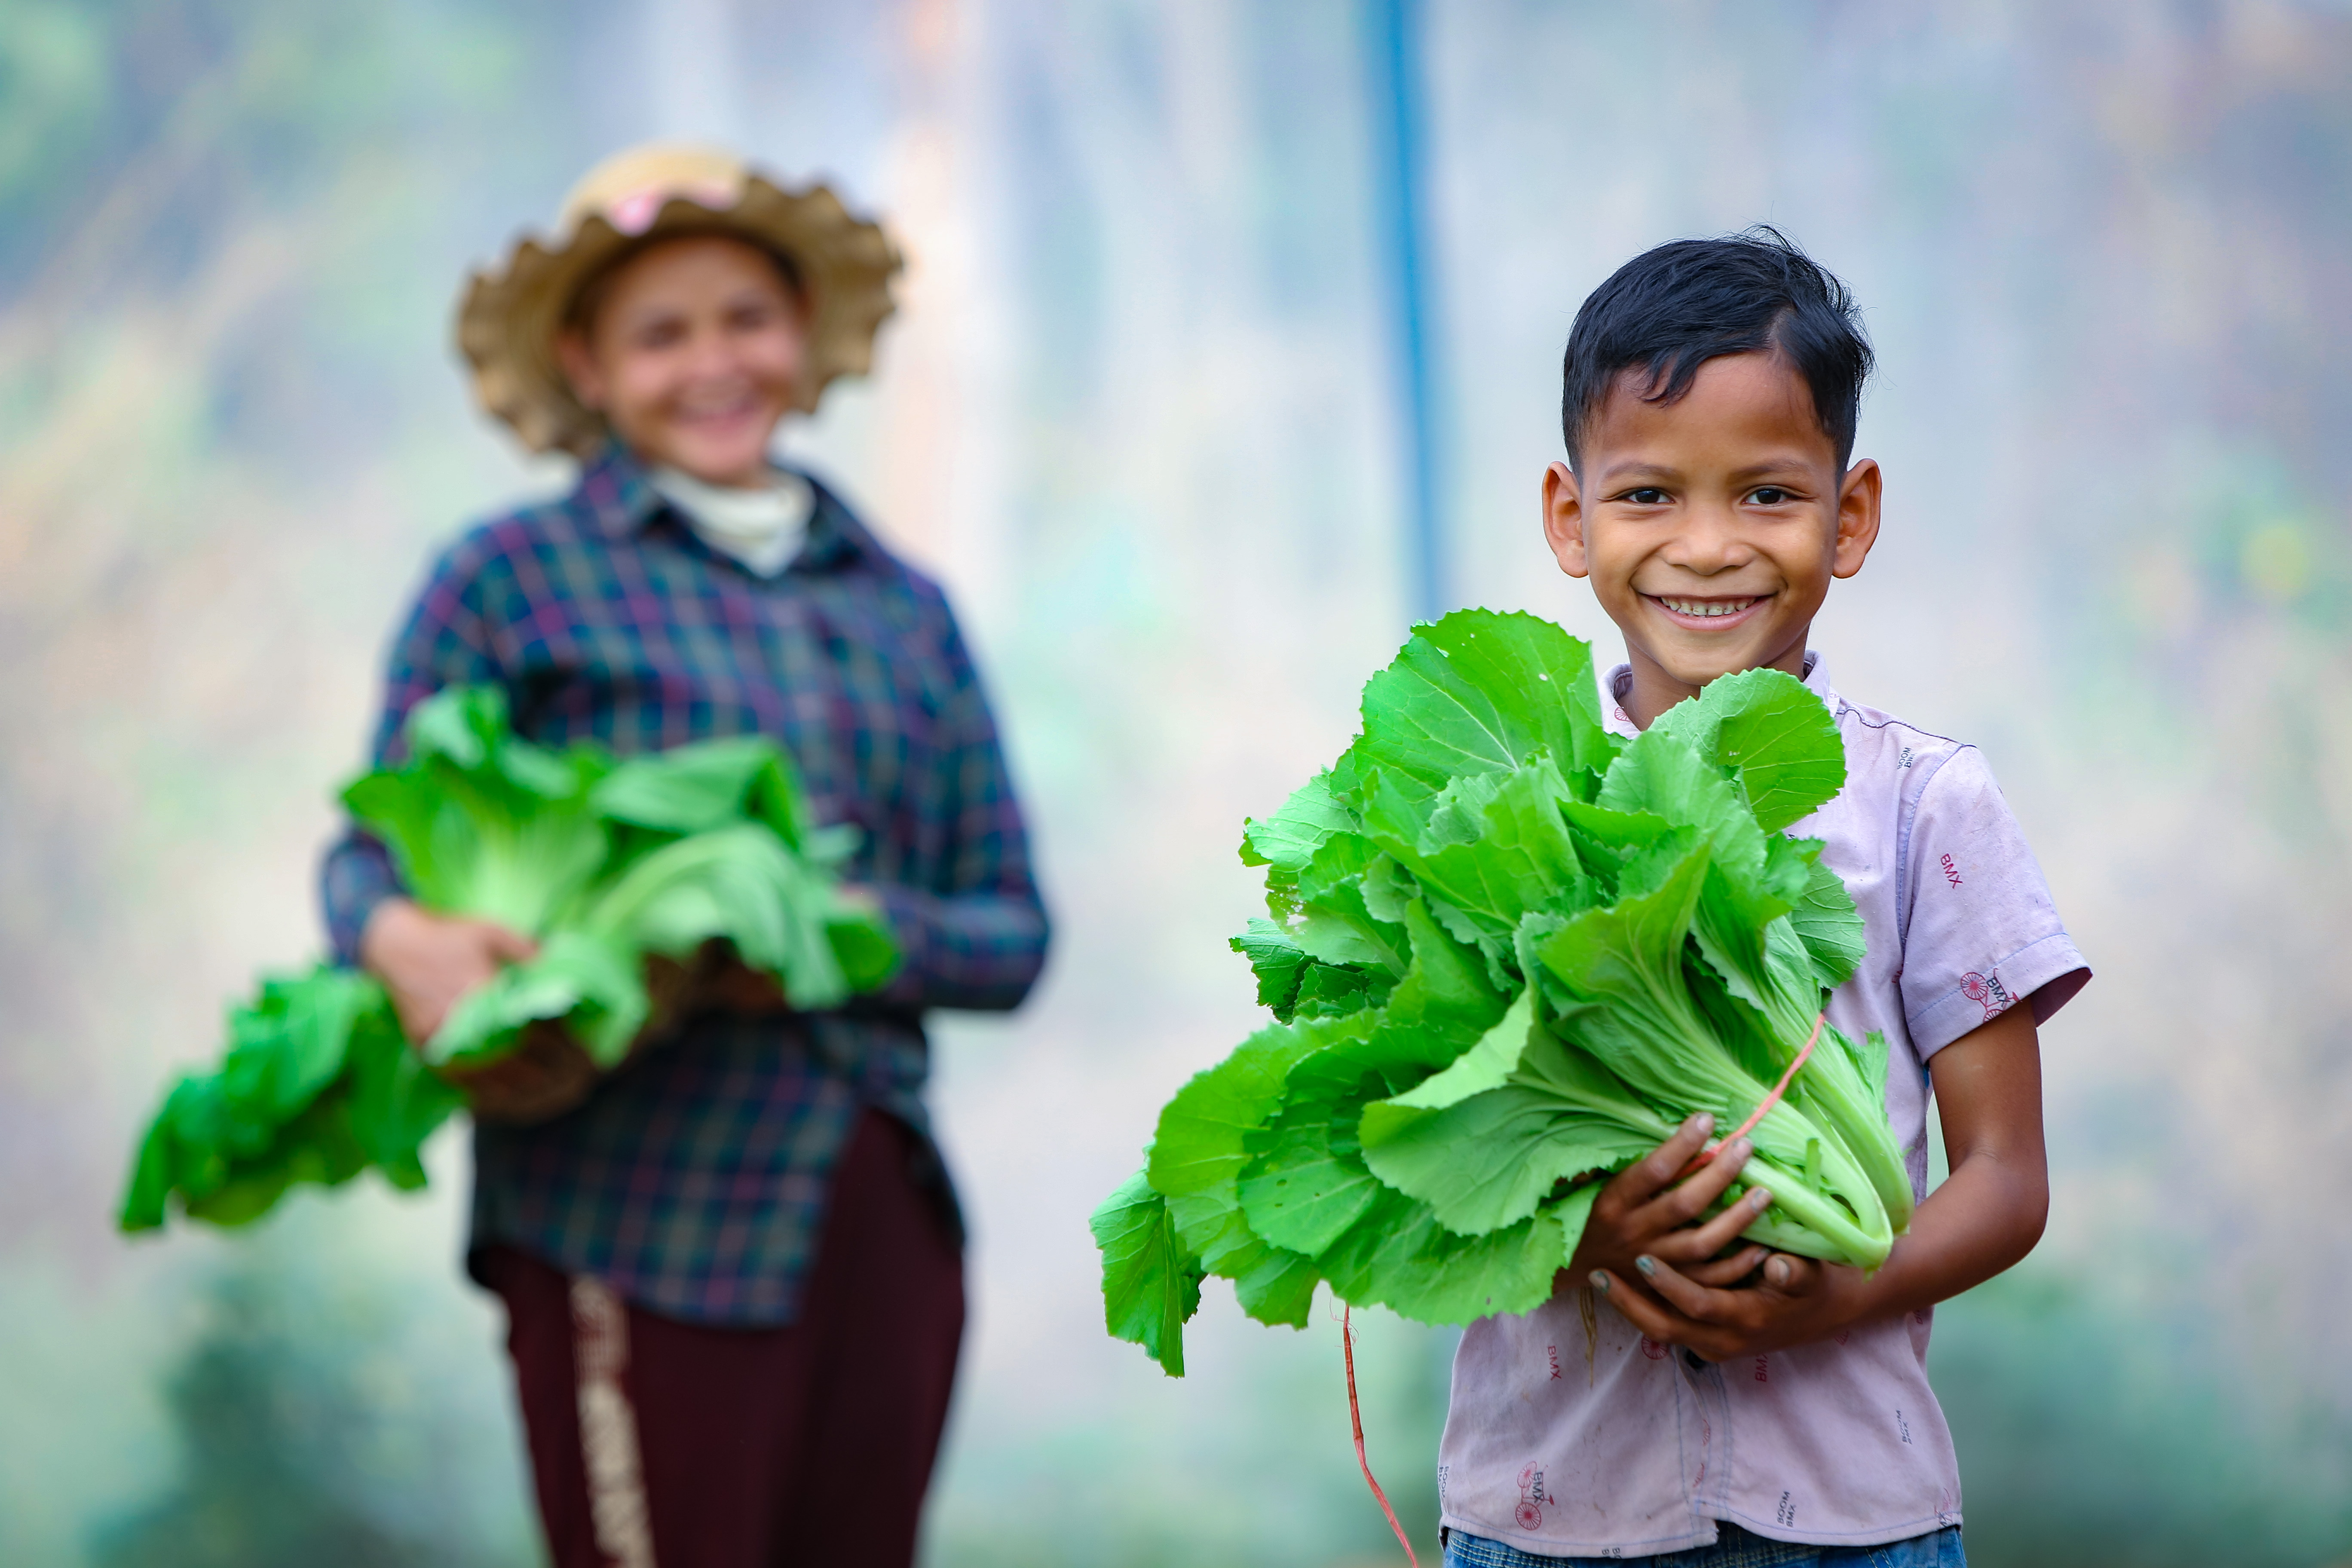 training on vegetable growing helps families fight nutrition in Cambodia, a mother and son walk with some of their harvested vegetables